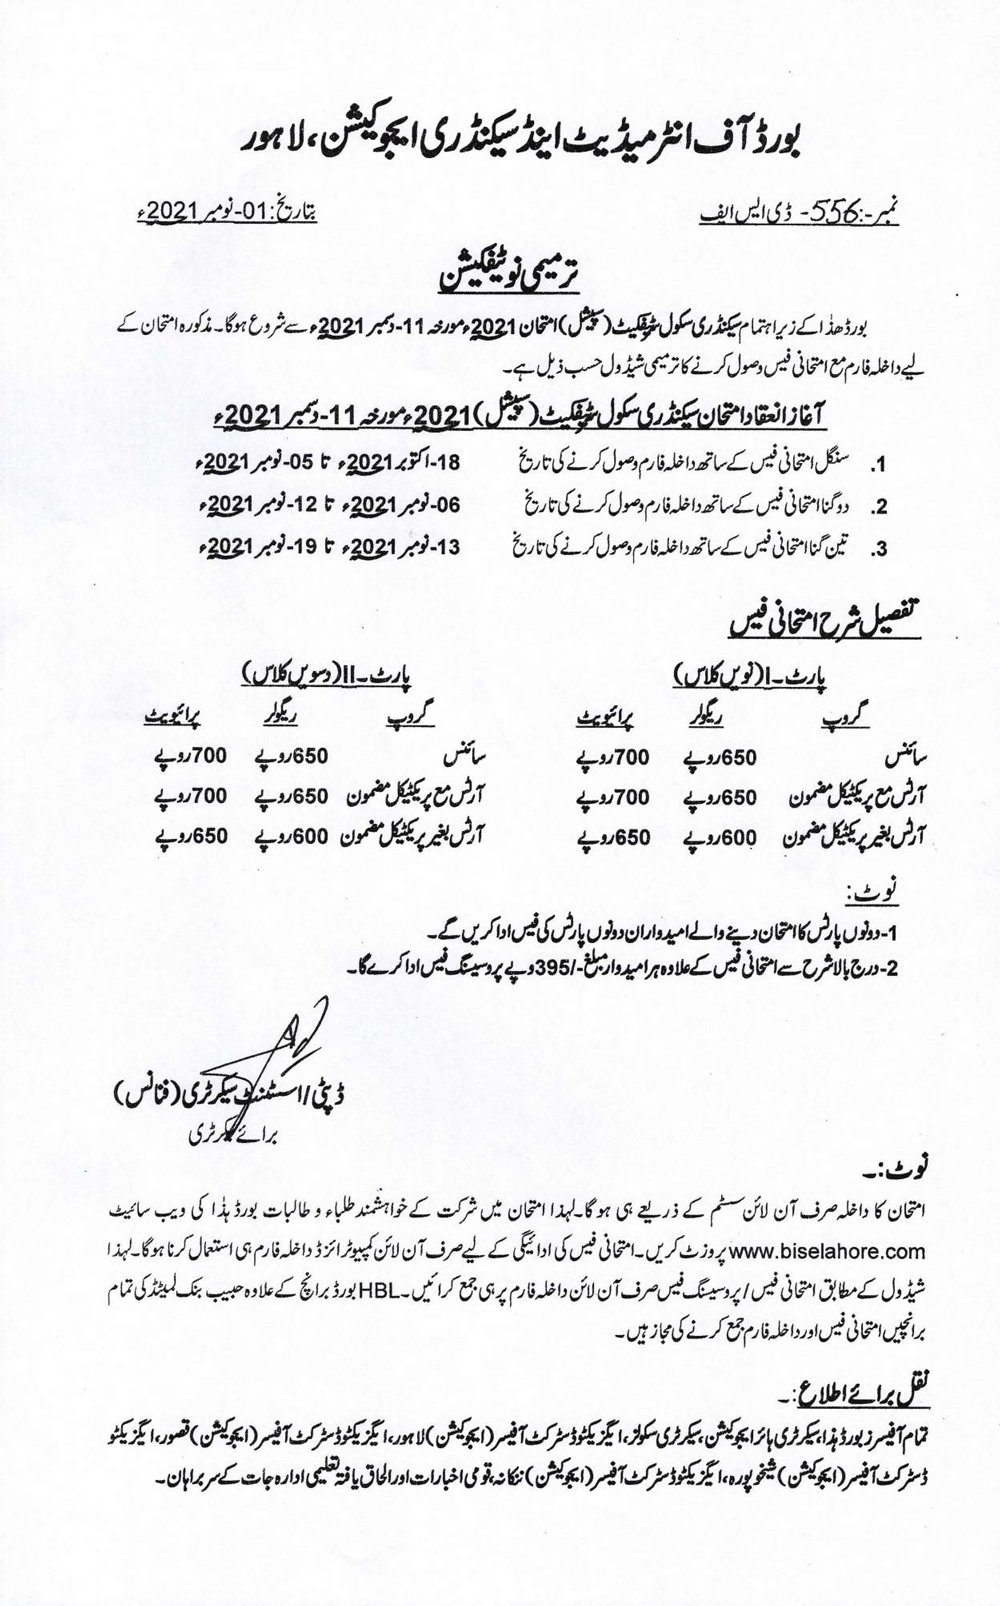 BISE Lahore Announces Exam Form Submission Dates, Fees for SSC Part I, II